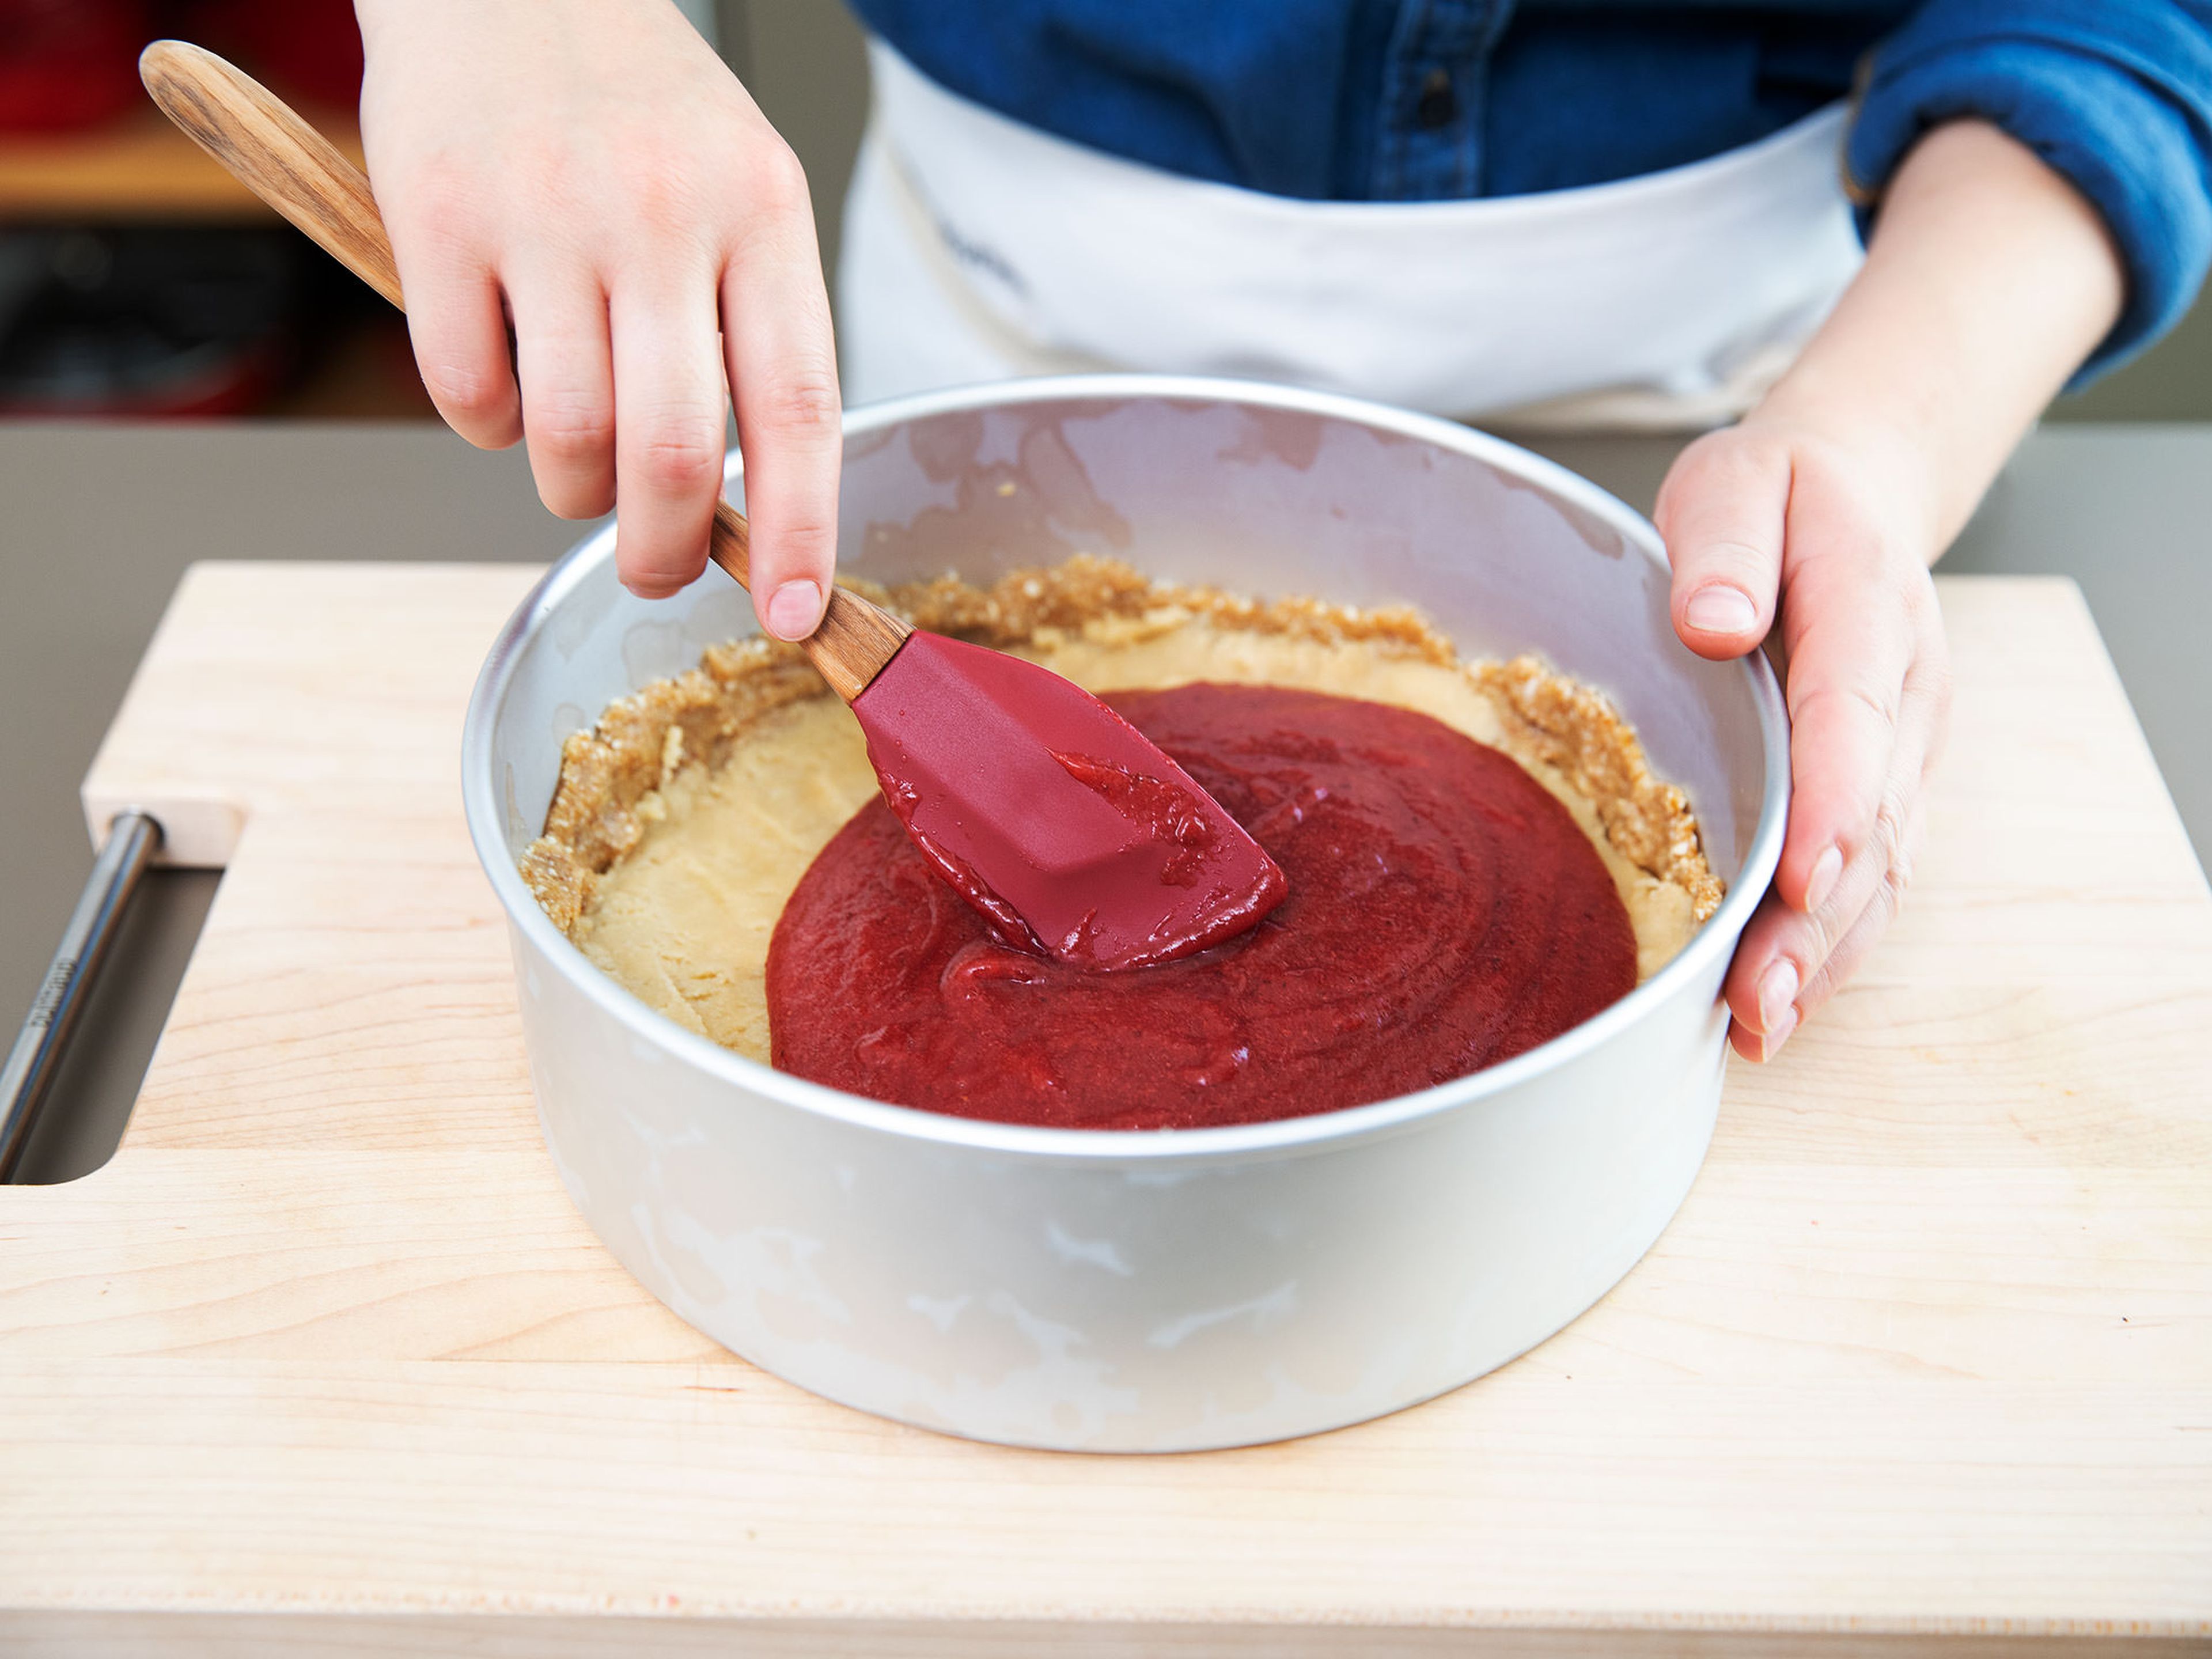 Allow cherry mixture to cool, then spread evenly into the crust. Let rest in the fridge for approx. 2 – 3 hr. Enjoy!